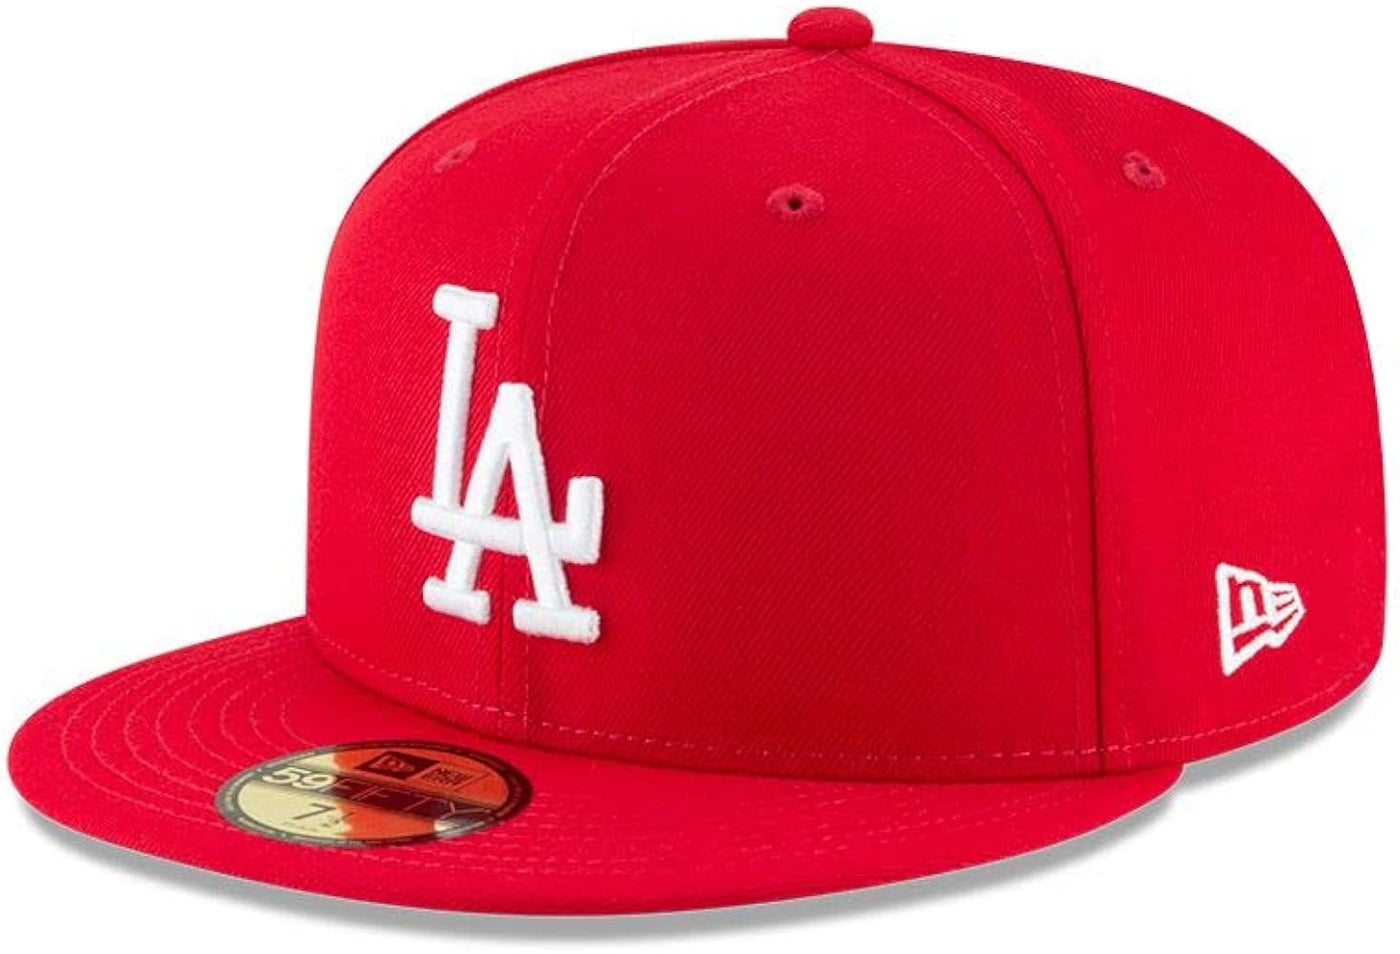 NEW ERA MLB BASIC 5950 LOS DODGERS SCARLET FITTED HATS